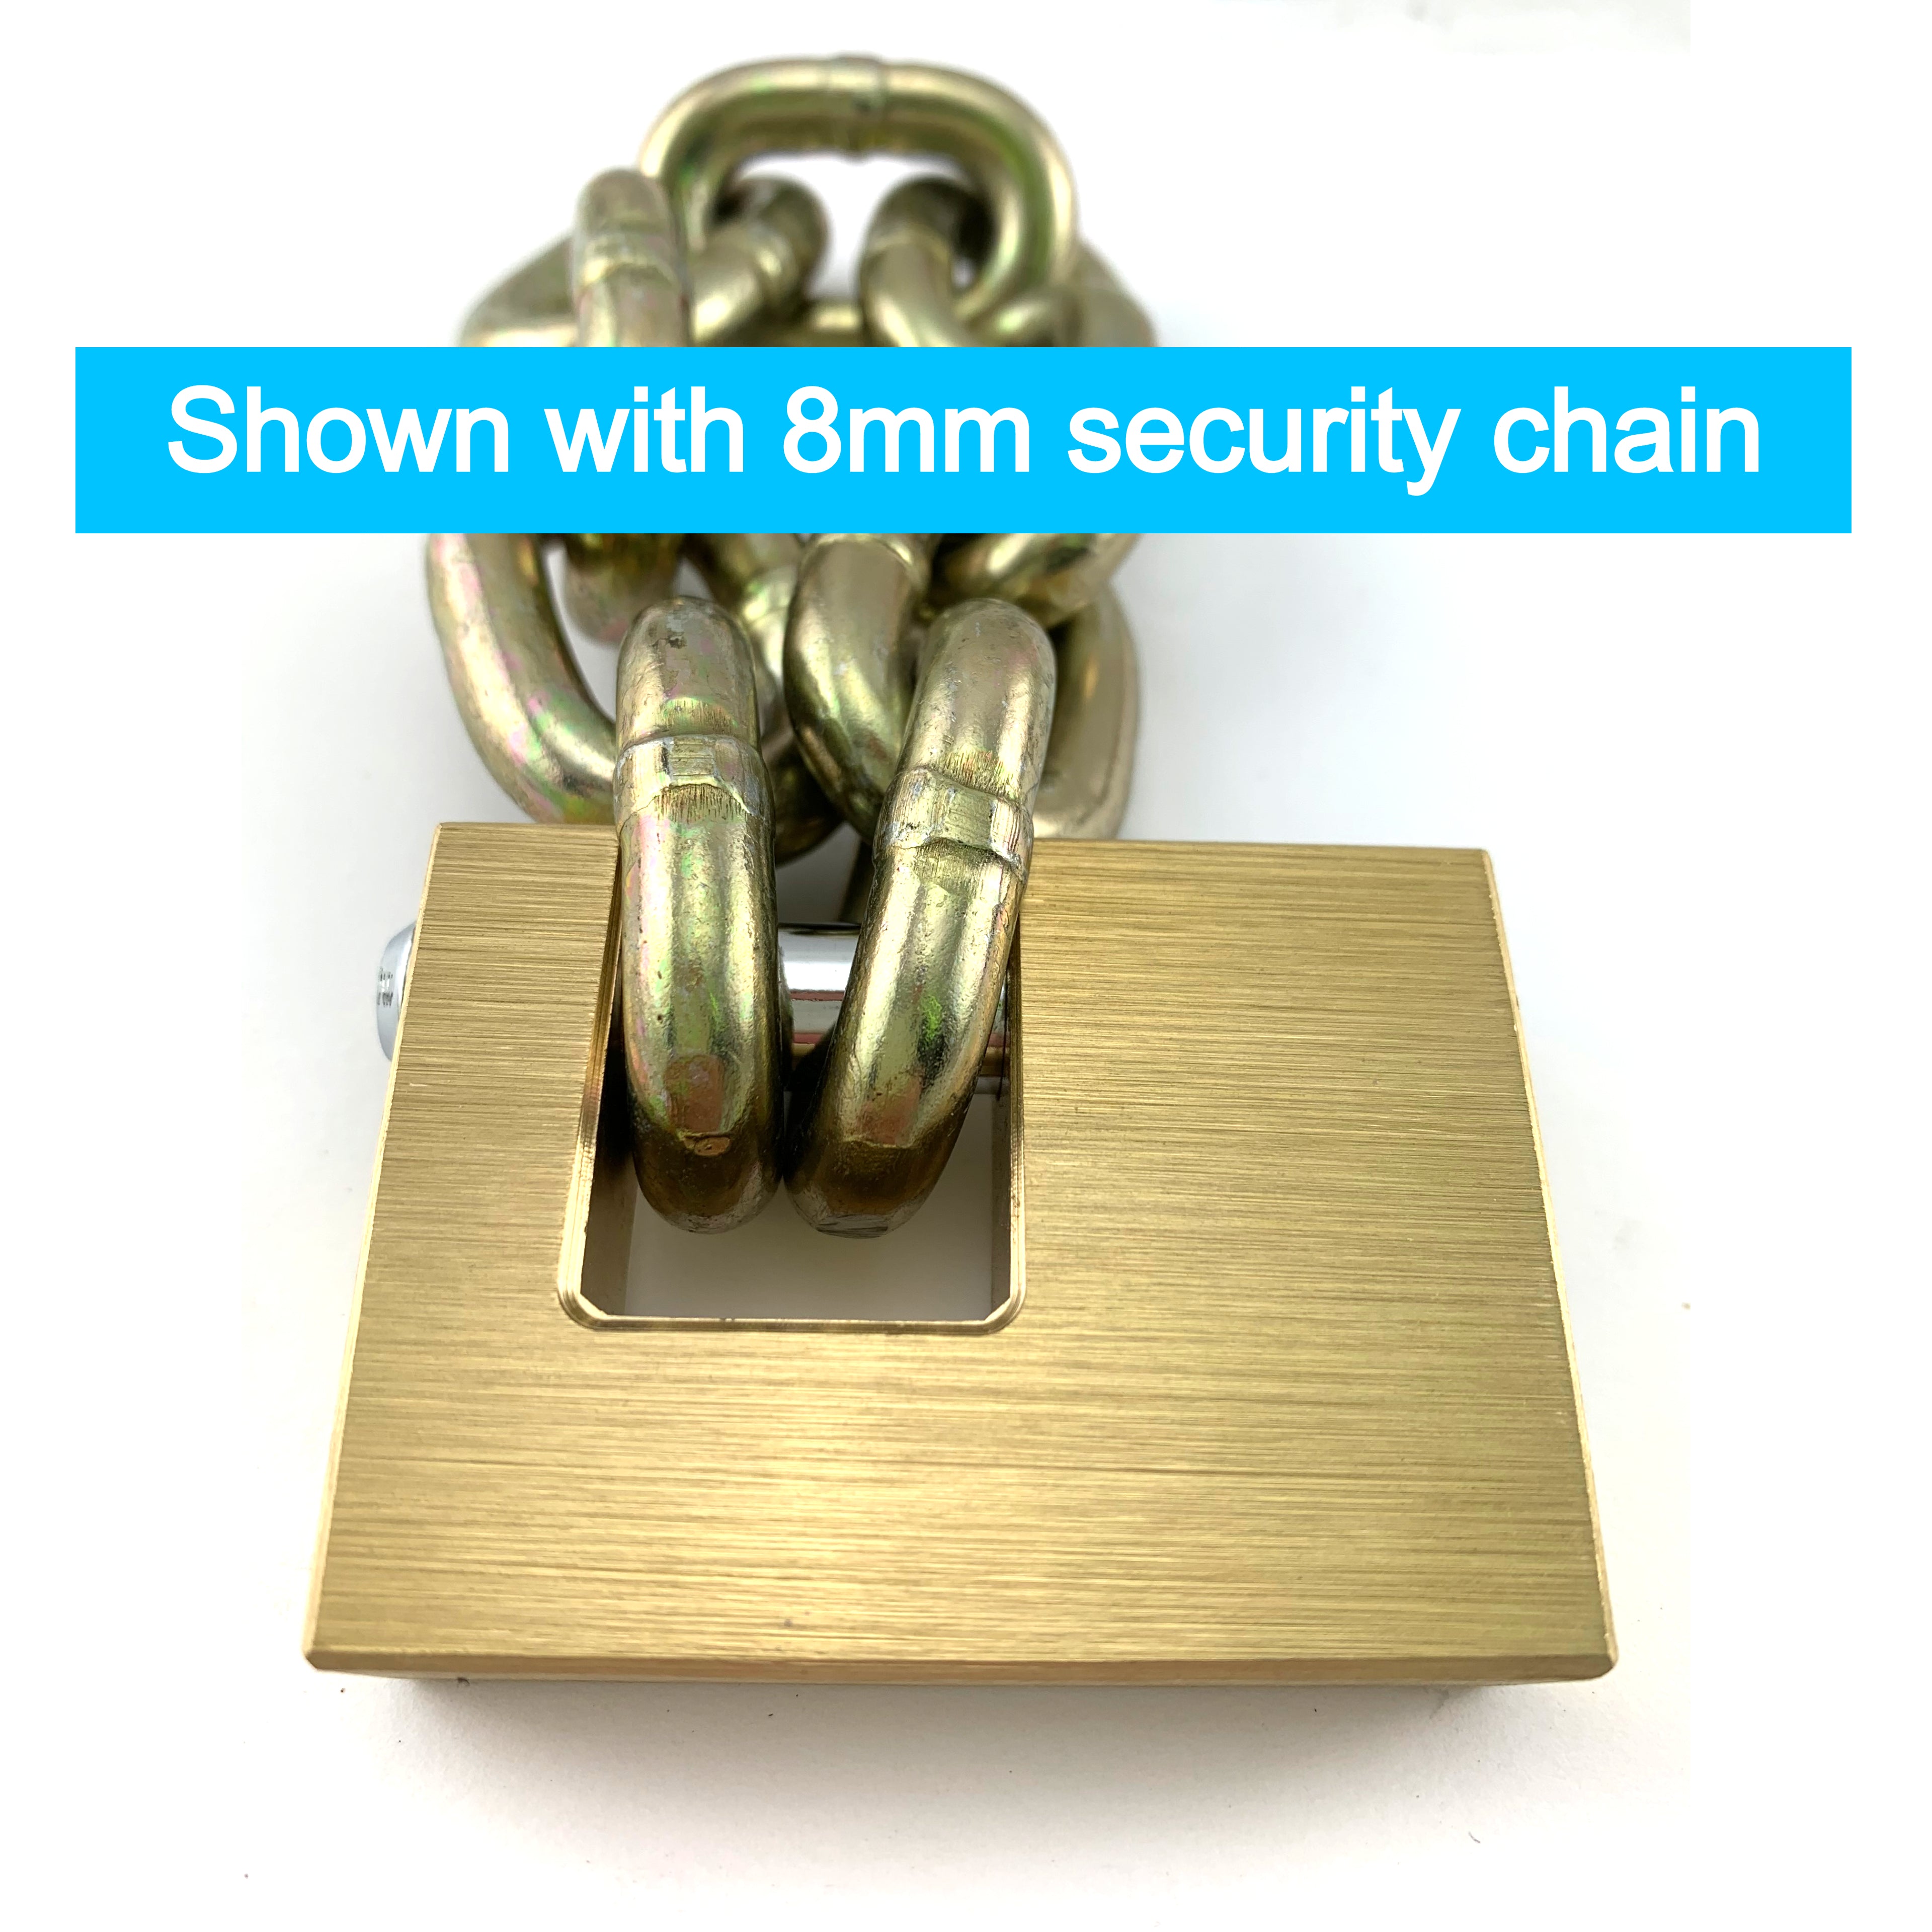 High-Security Monoblock Padlock 12mm, shown with 8mm security chain. Australia.